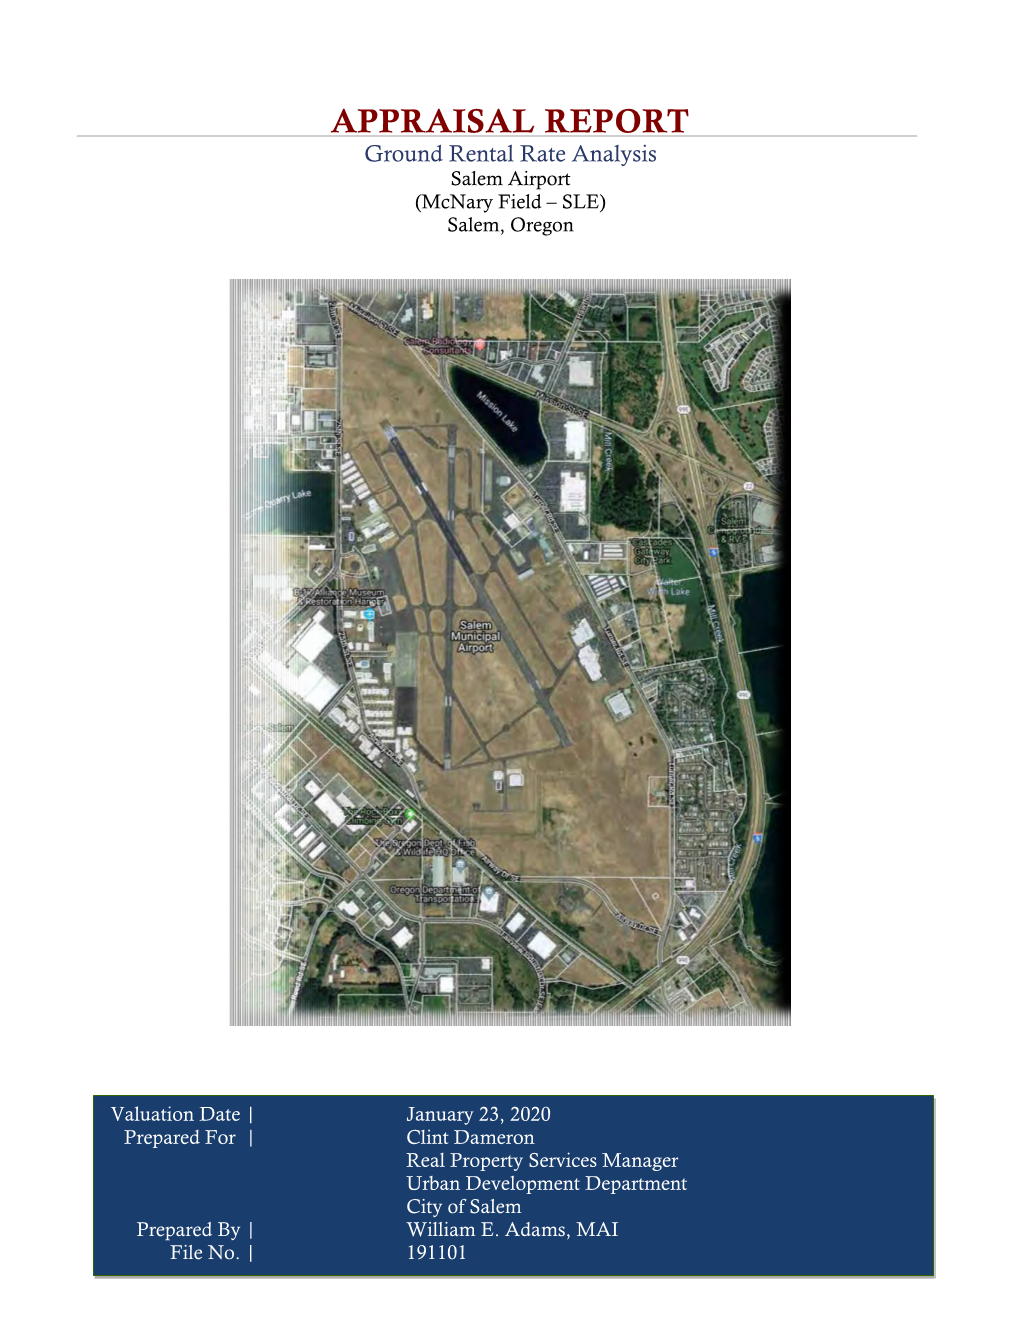 Airport Ground Lease Rental Rate Appraisal 2020